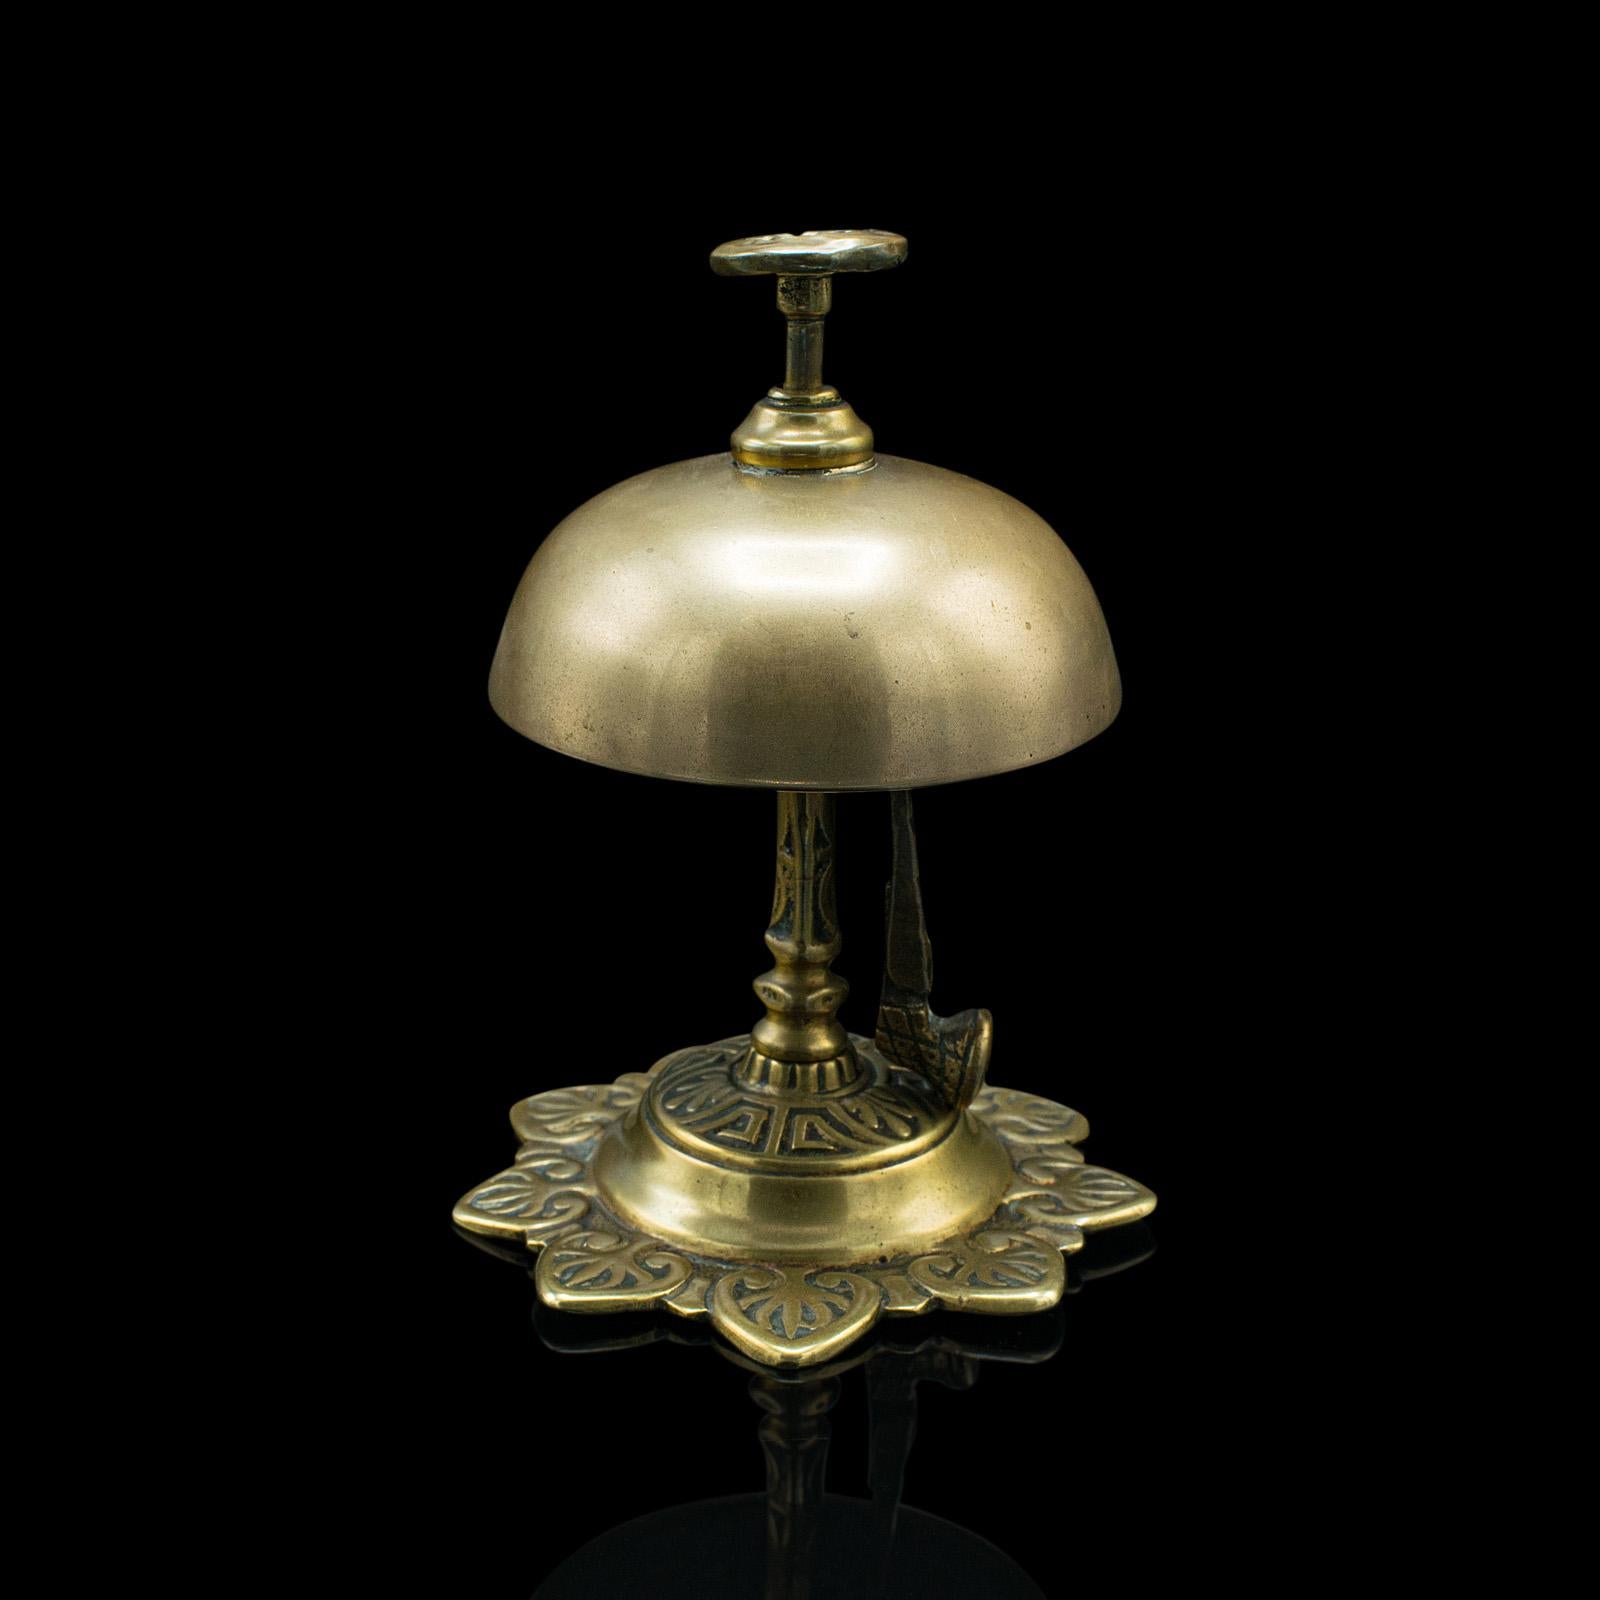 Late Victorian Antique Reception Bell, English, Brass, Country House, Counter Top, Victorian